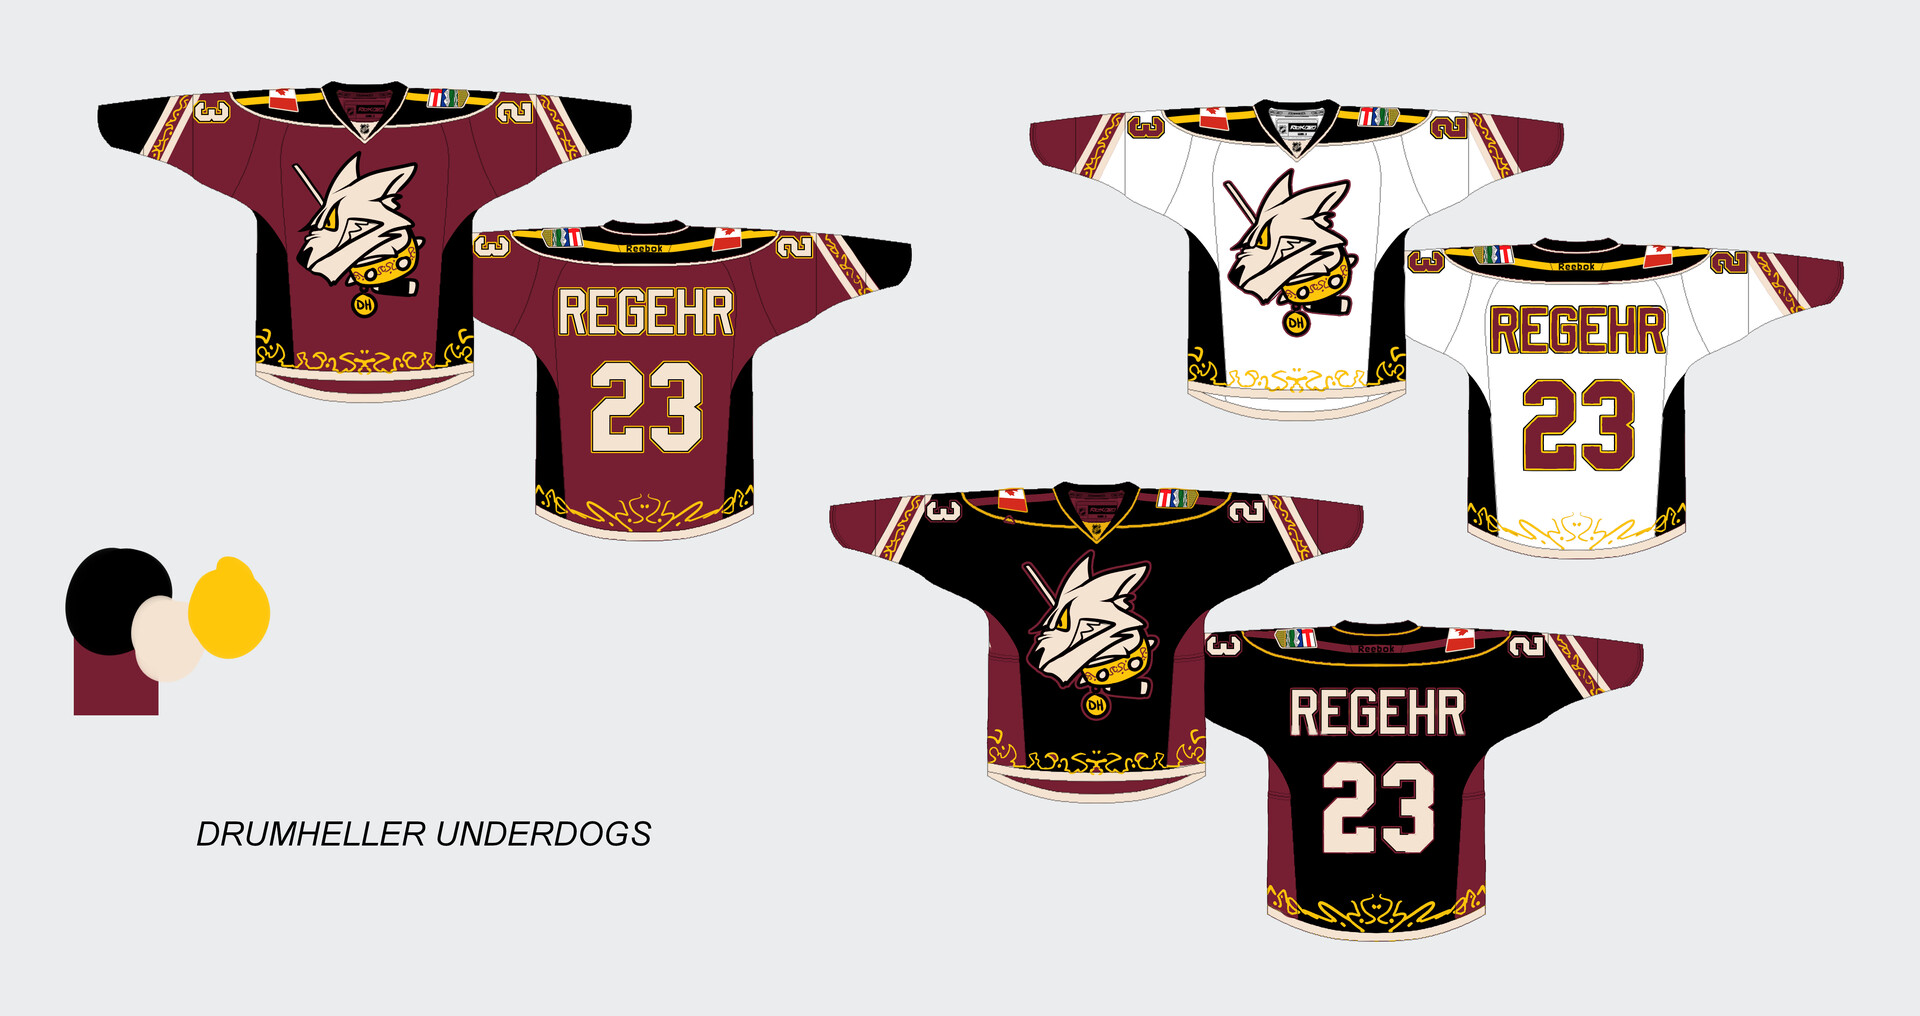 Hockey Jersey Concepts